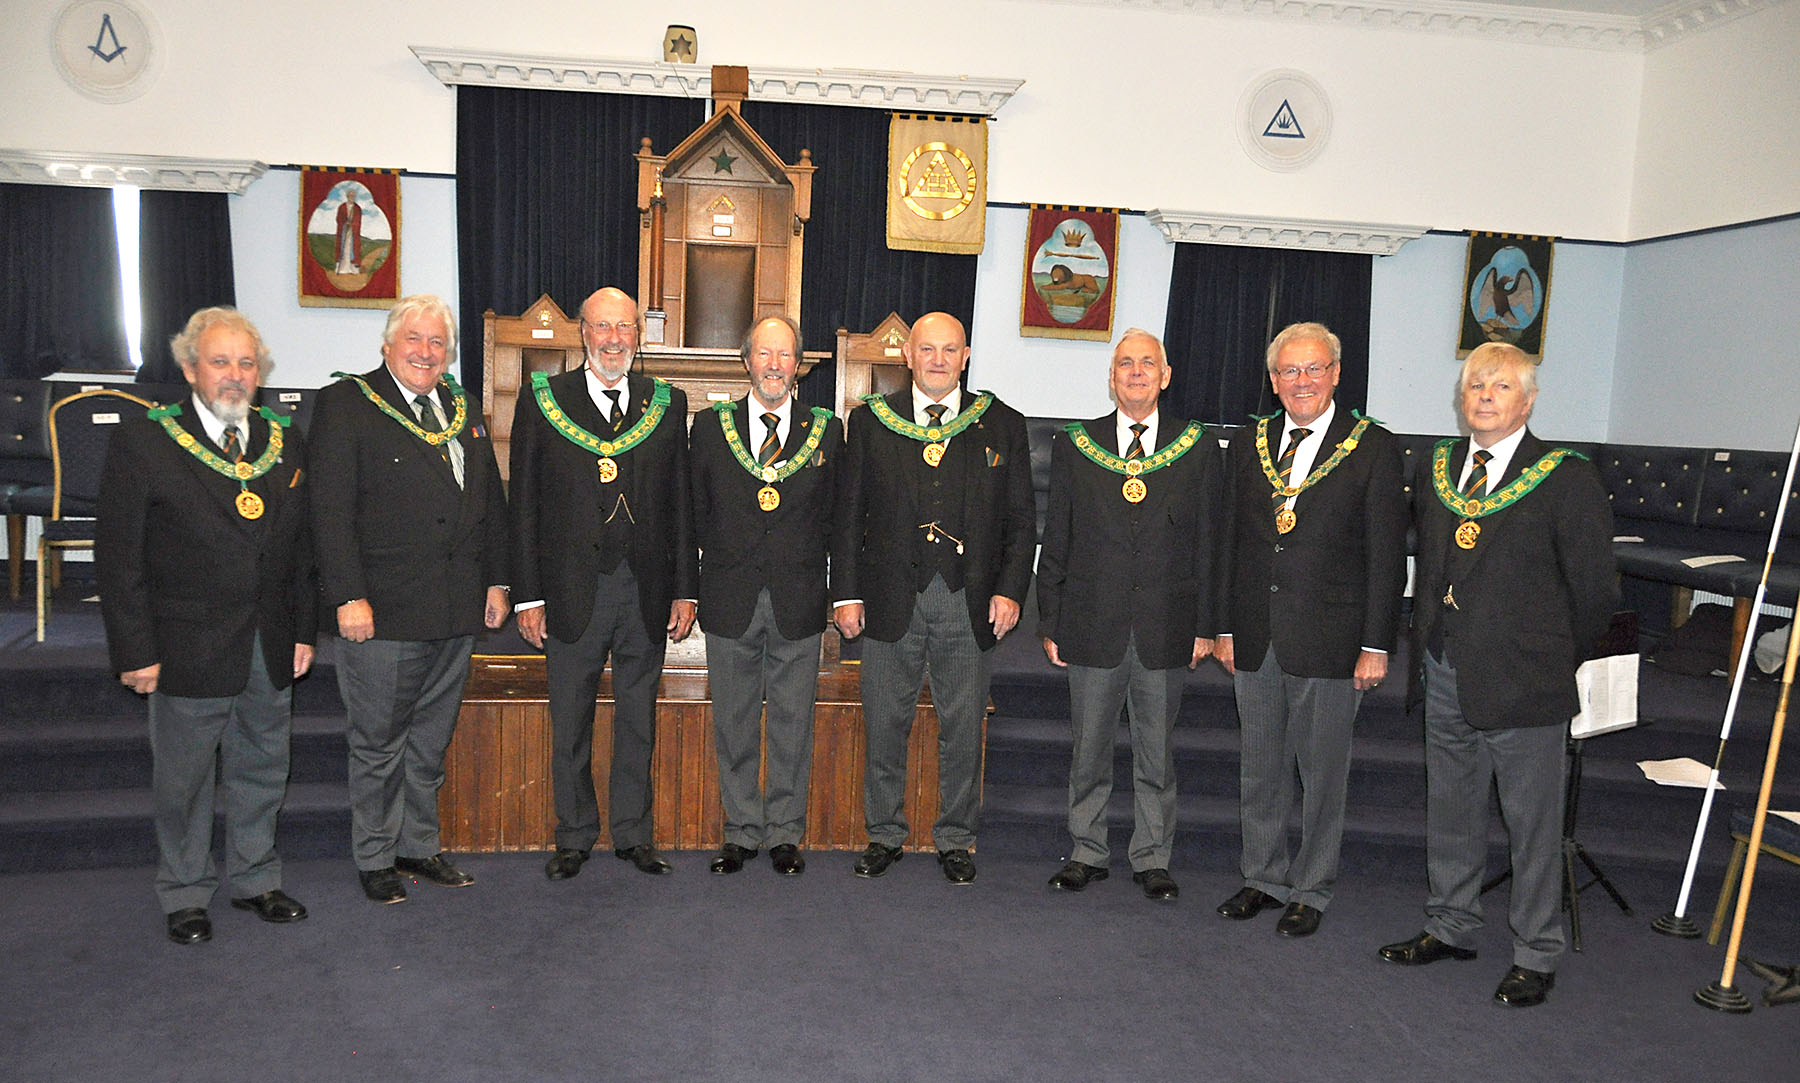 Devon and Cornwall District Meeting